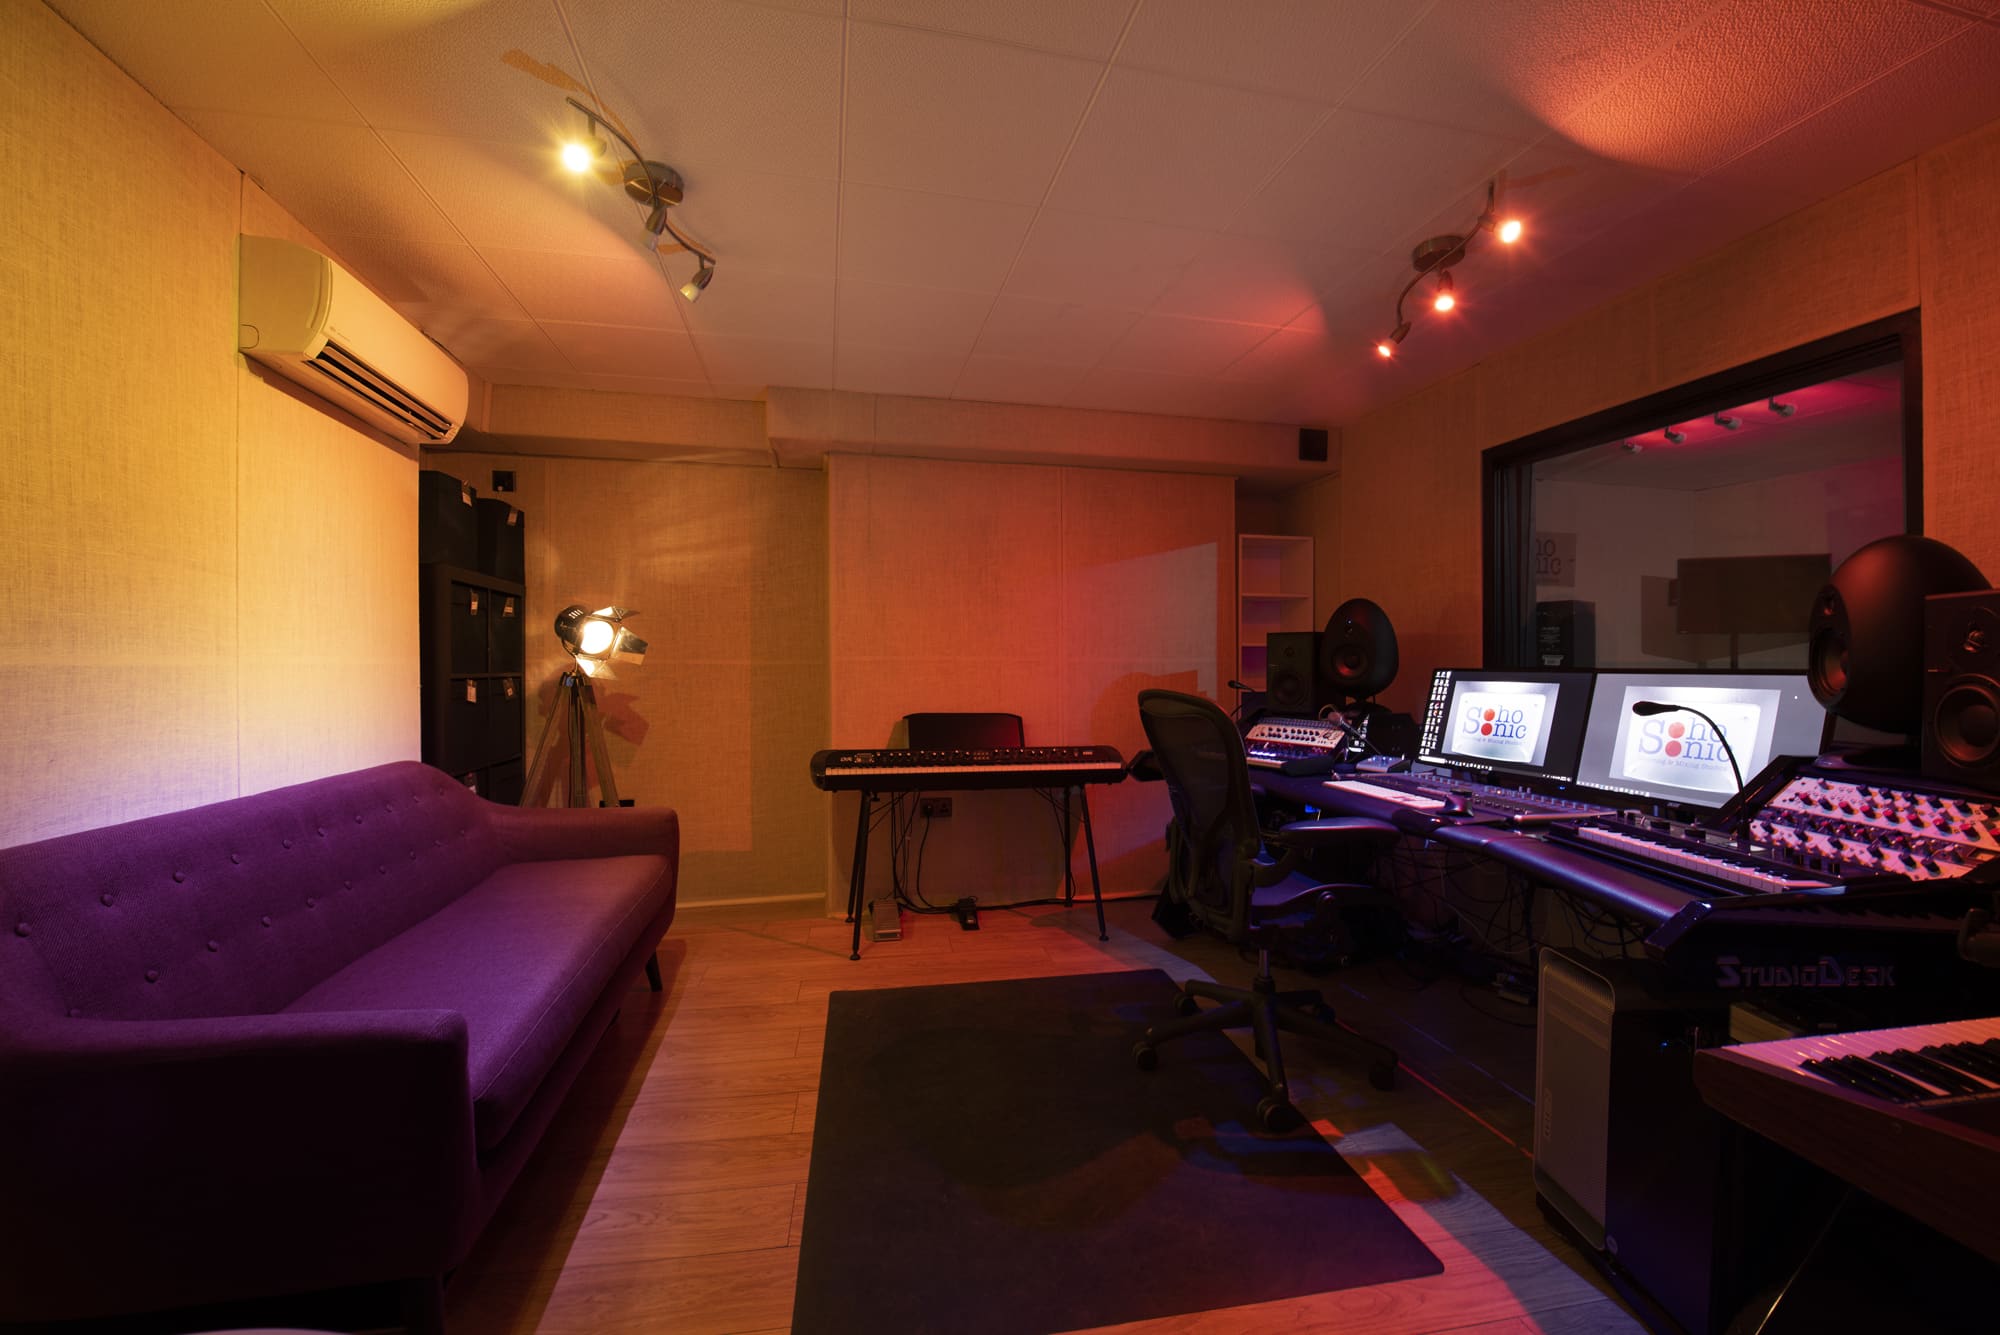 LOCATED IN CENTRAL LONDON, WE CAN ACCOMMODATE ALL YOUR AUDIO REQUIREMENTS